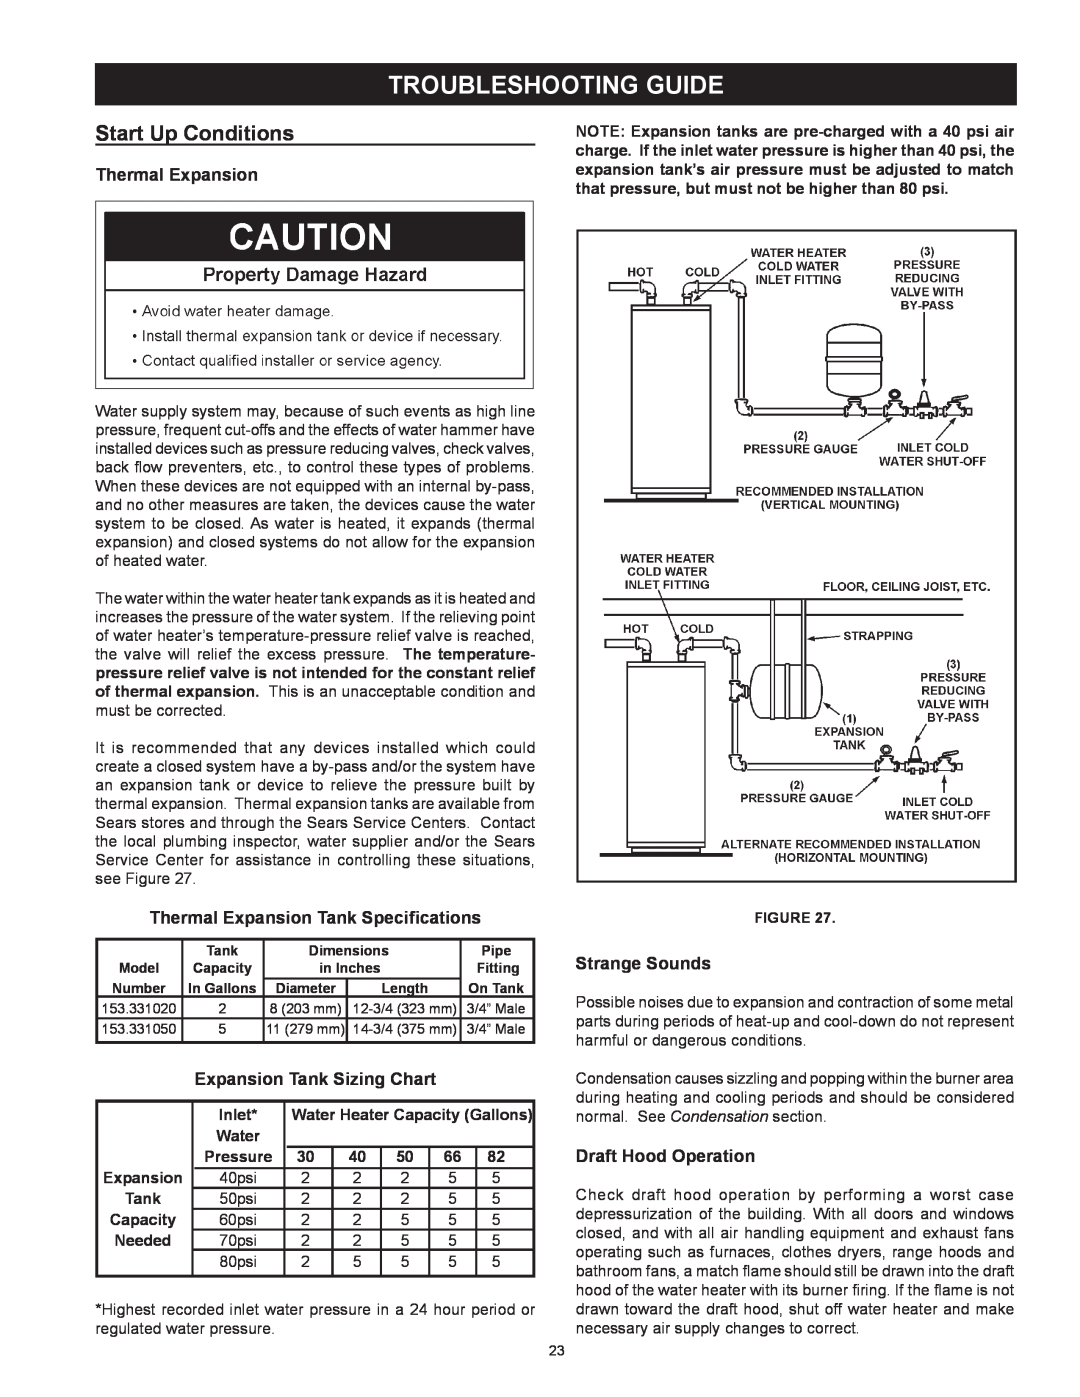 Kenmore 153.339161 Troubleshooting Guide, Thermal Expansion Tank Specifications, Expansion Tank Sizing Chart, Inlet 